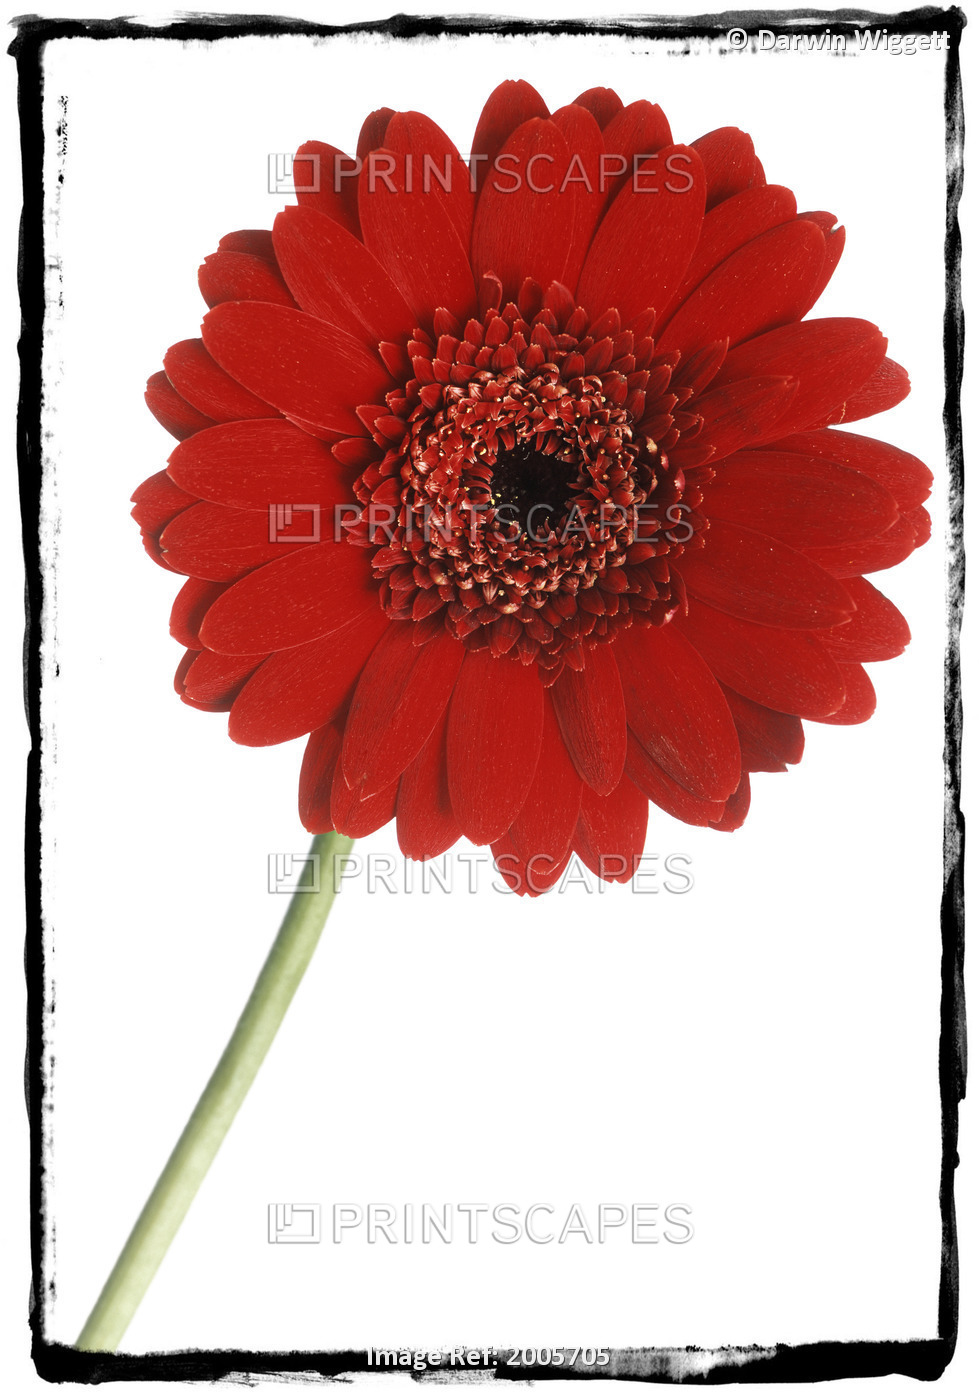 Fv5221, Natural Moments Photography; Red Gerber Daisy On White Background